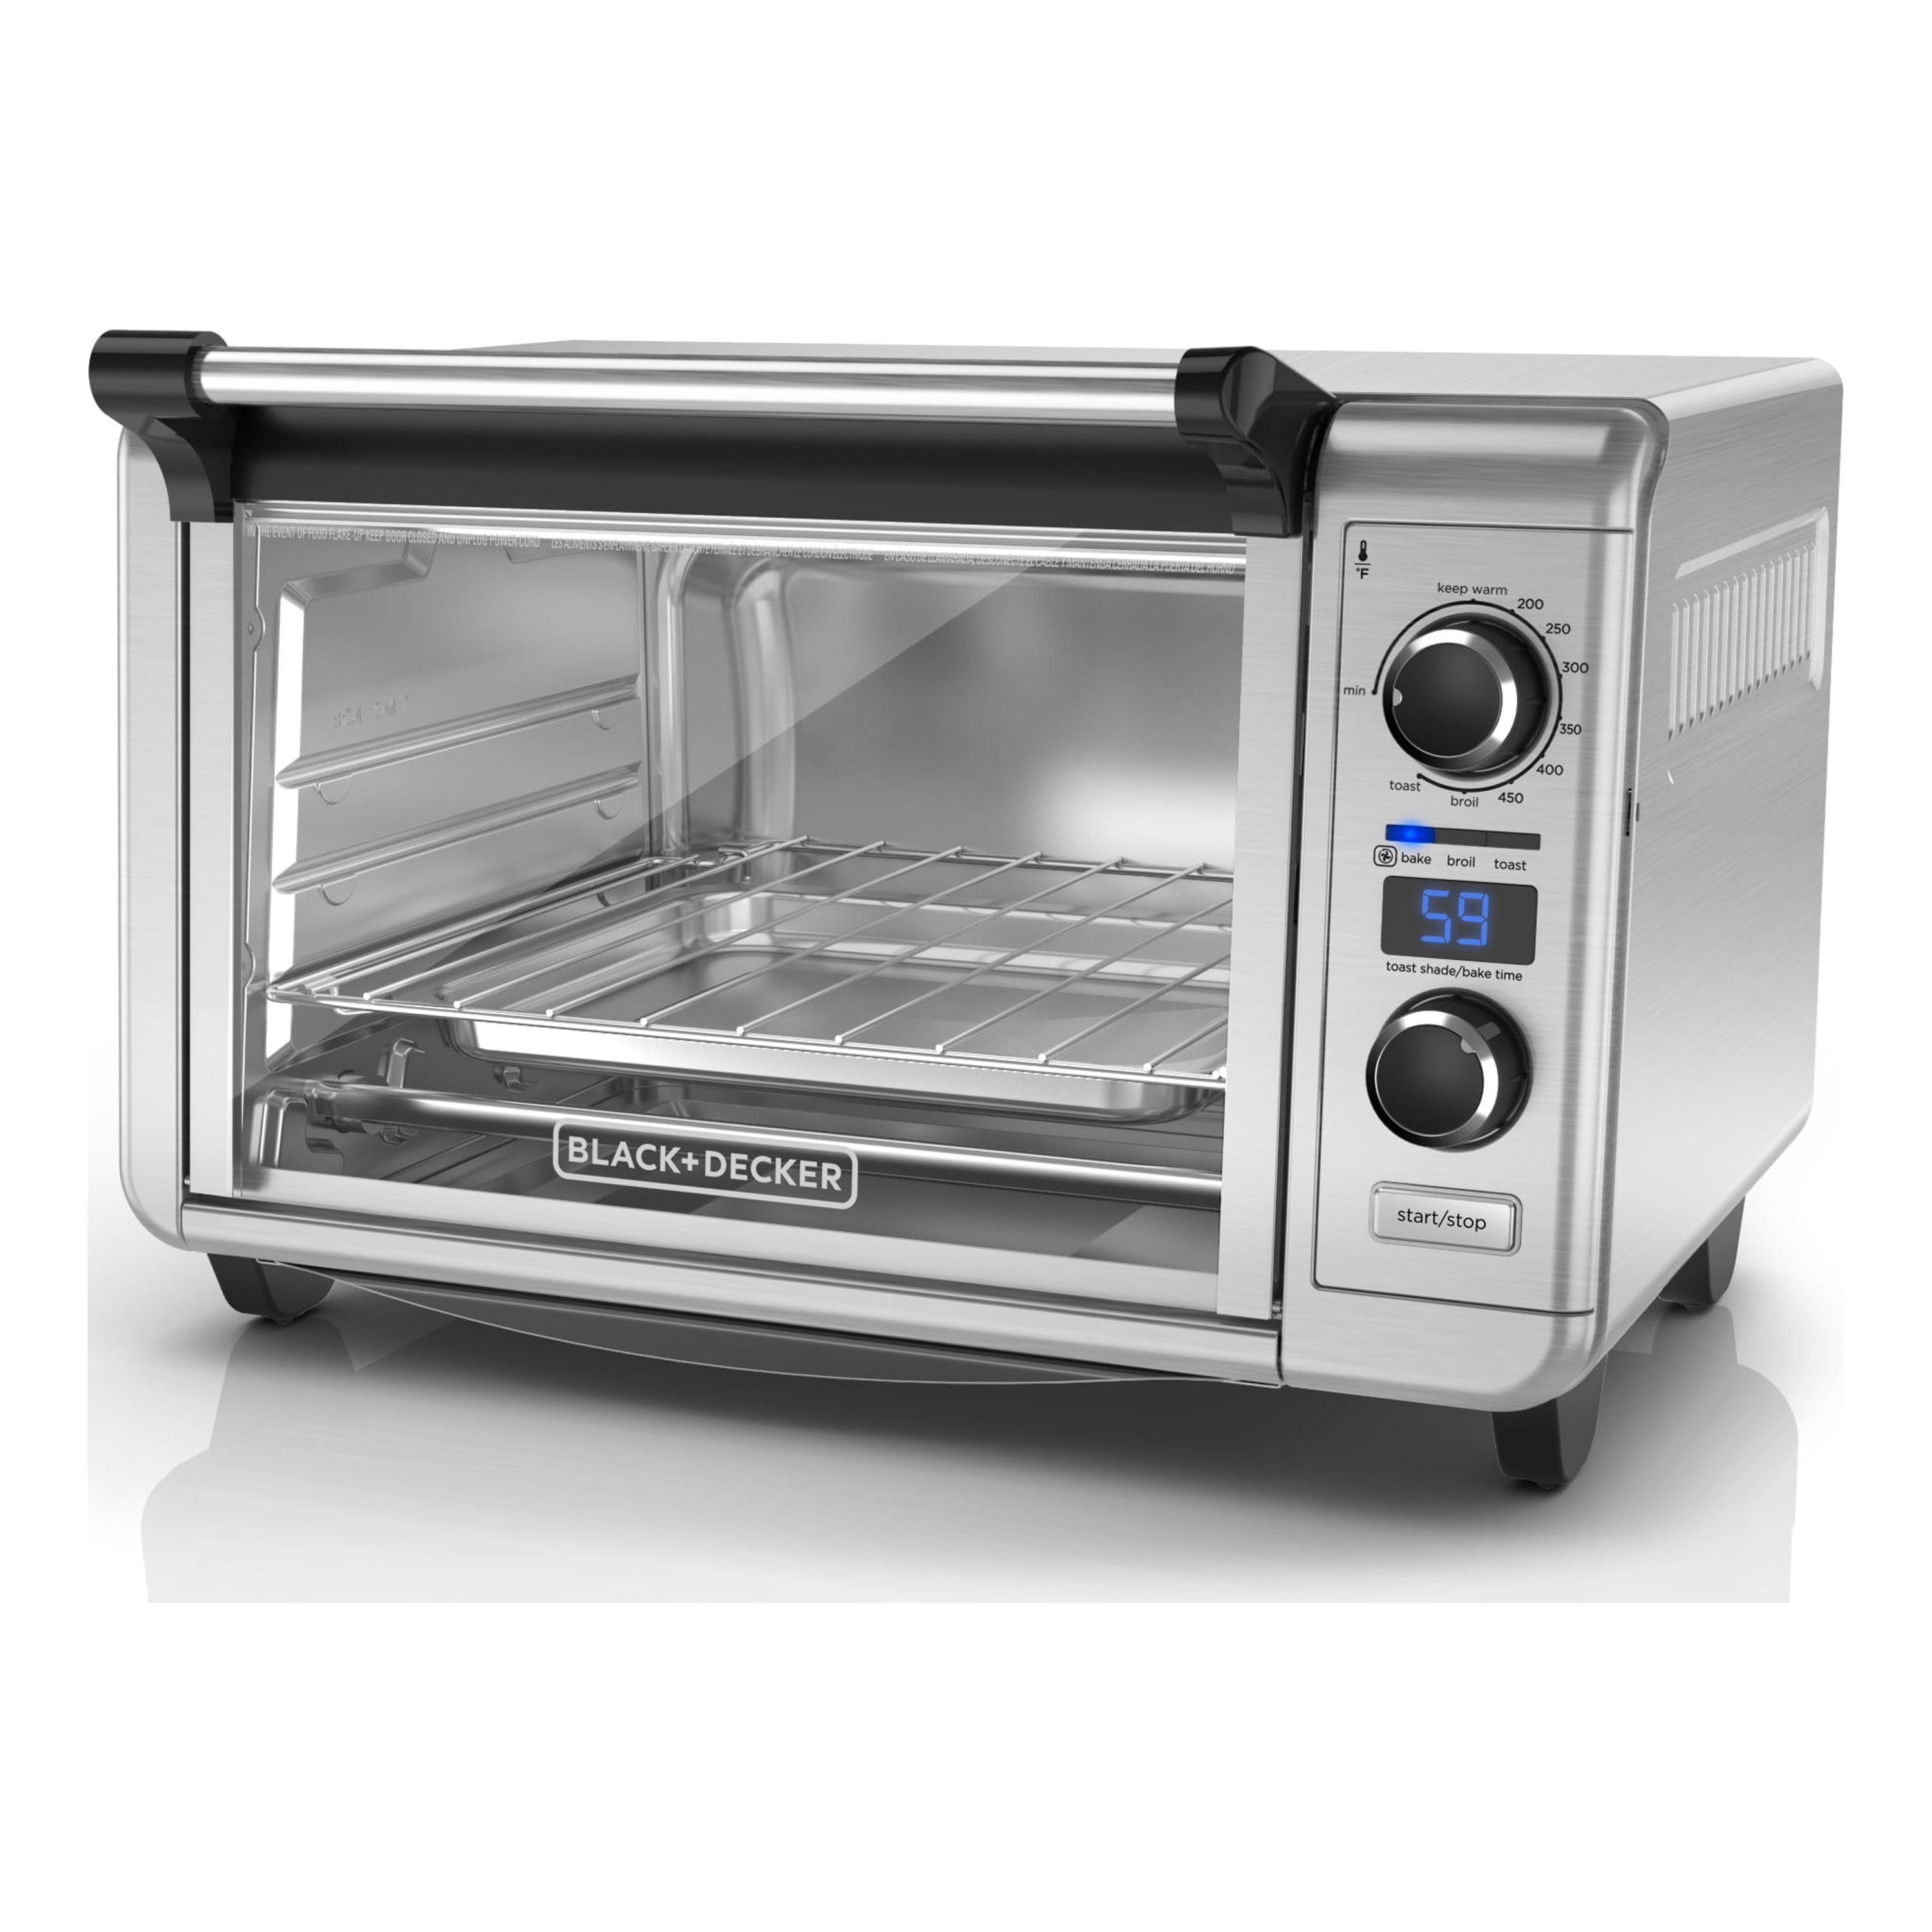 BLACK+DECKER 6-Slice Digital Convection Countertop Oven, Toaster Oven,  Stainless Steel, TOD3300SS 